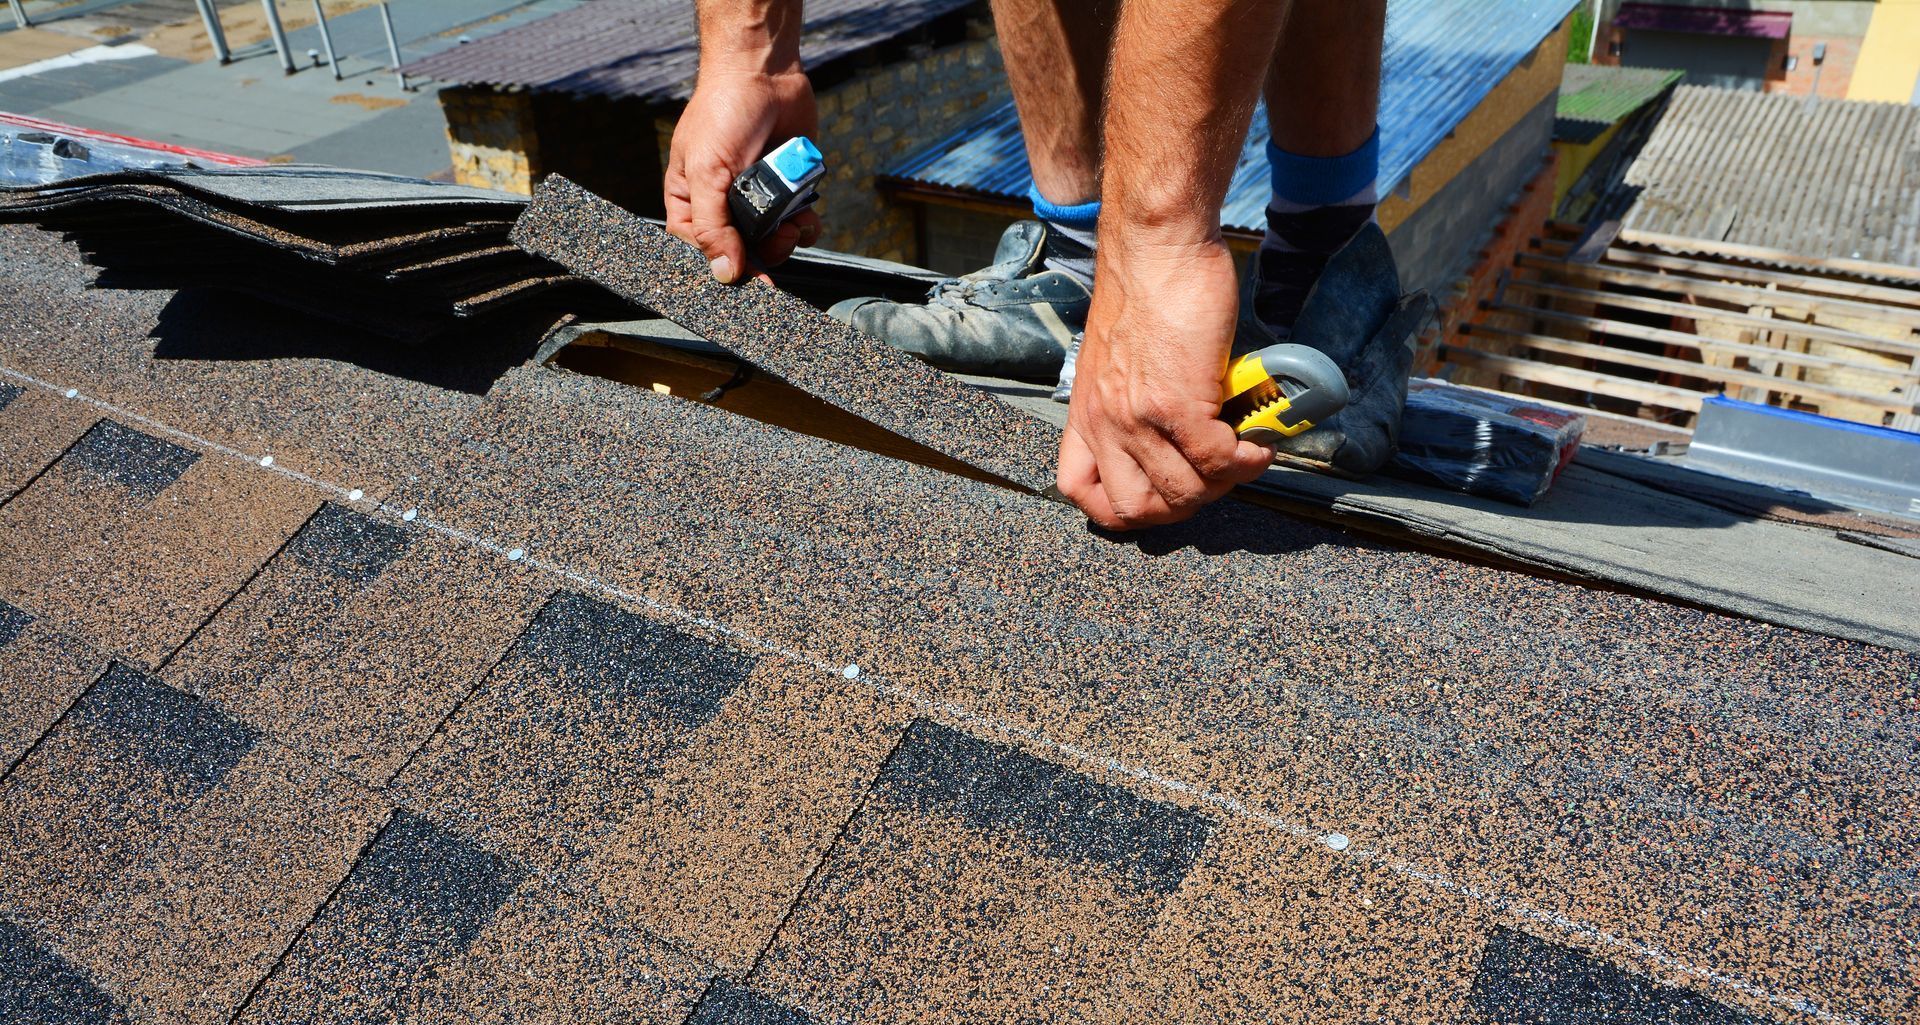 a man is installing shingles on a roof .